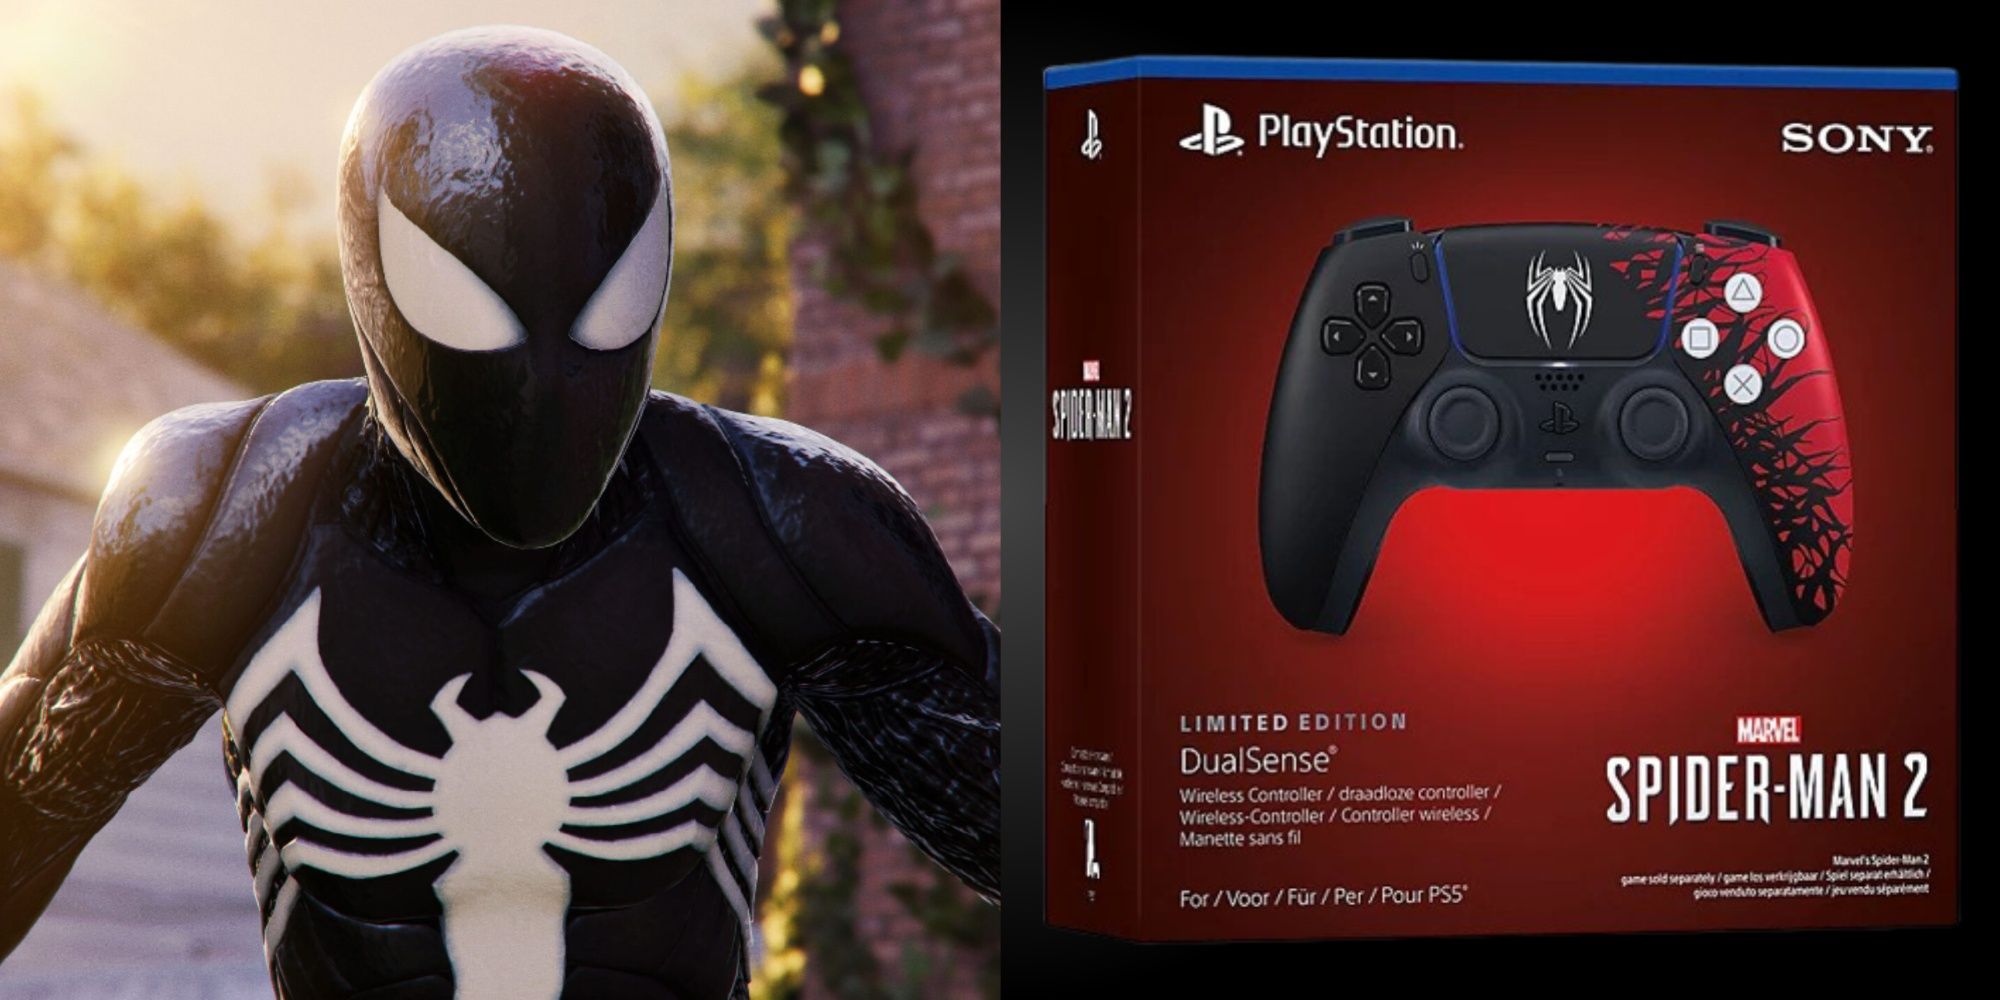 Spider-Man 2's DualSense Controllers Are Being Restocked On